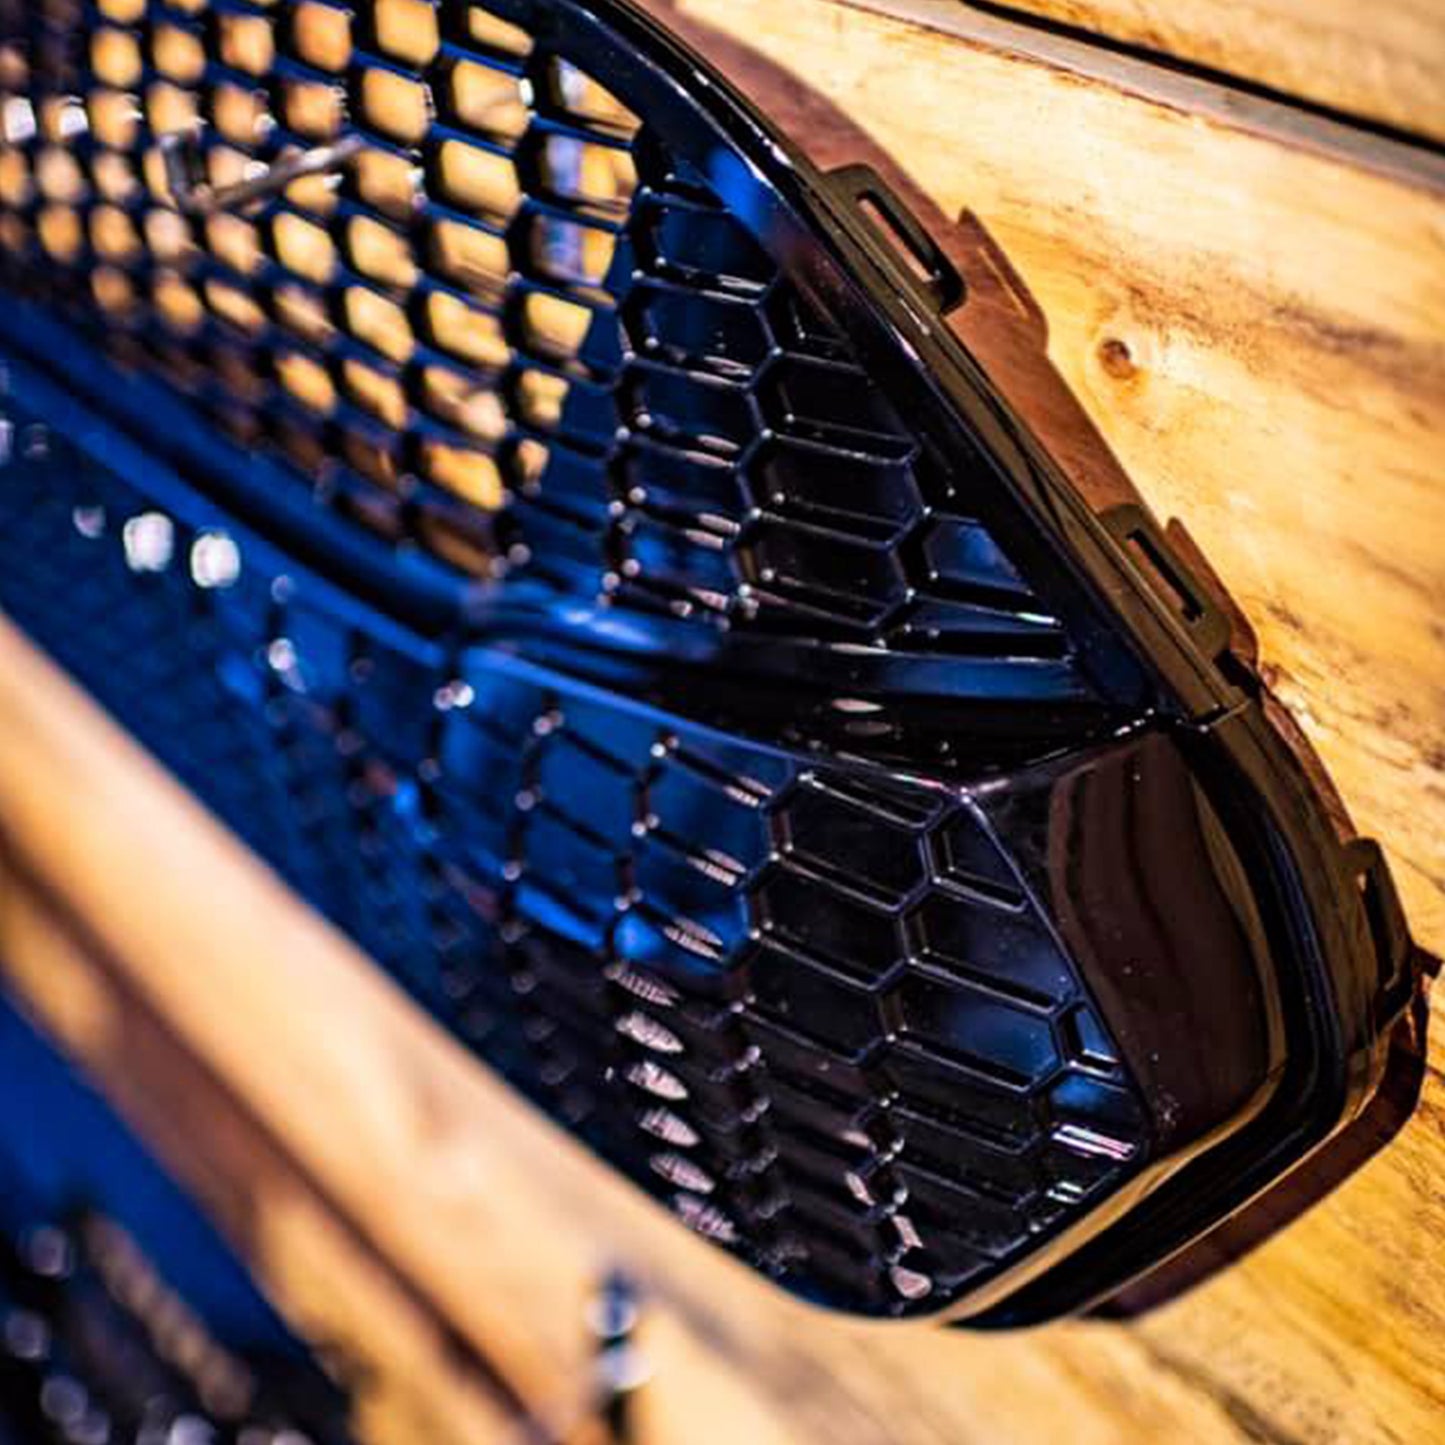 For Ford Transit Custom Front Grille Honeycomb Modified 2012 - 2018 MK1 Gloss Black Painted and Ready to Fit